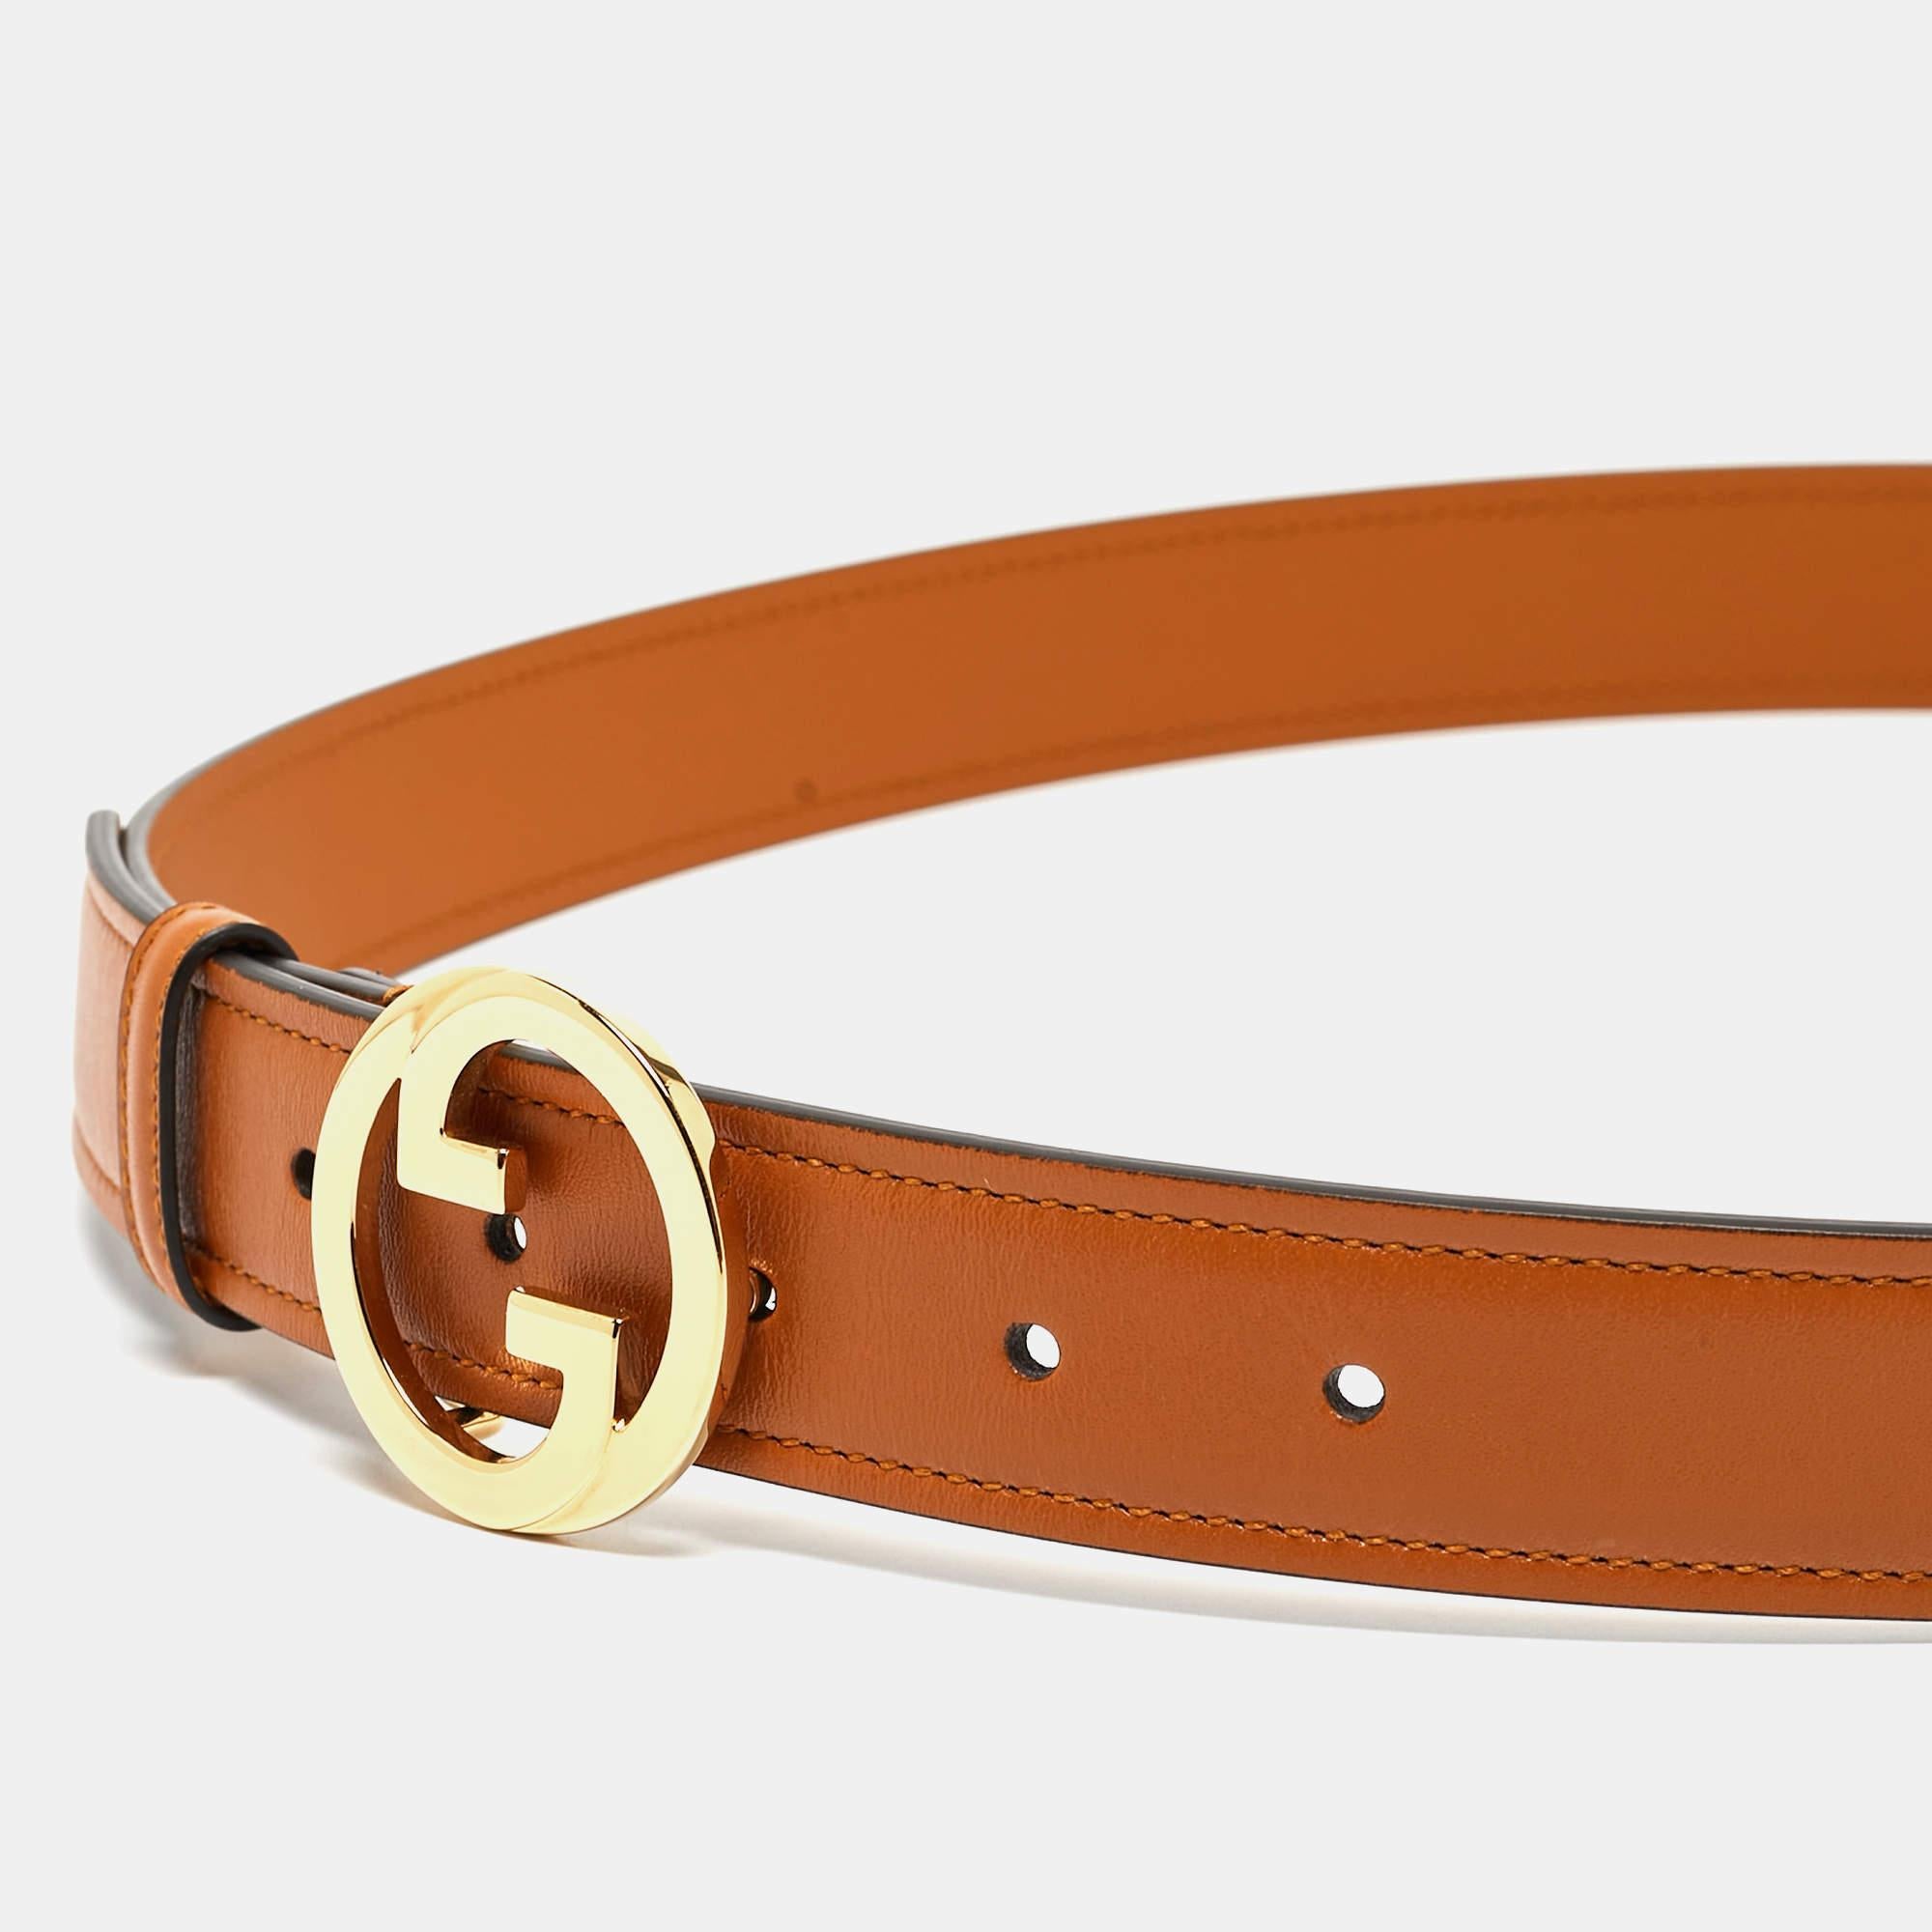 This Gucci belt is crafted from leather. The classic piece has tan shade to match a variety of outfits. It is completed with a gold-tone interlocking G buckle.

